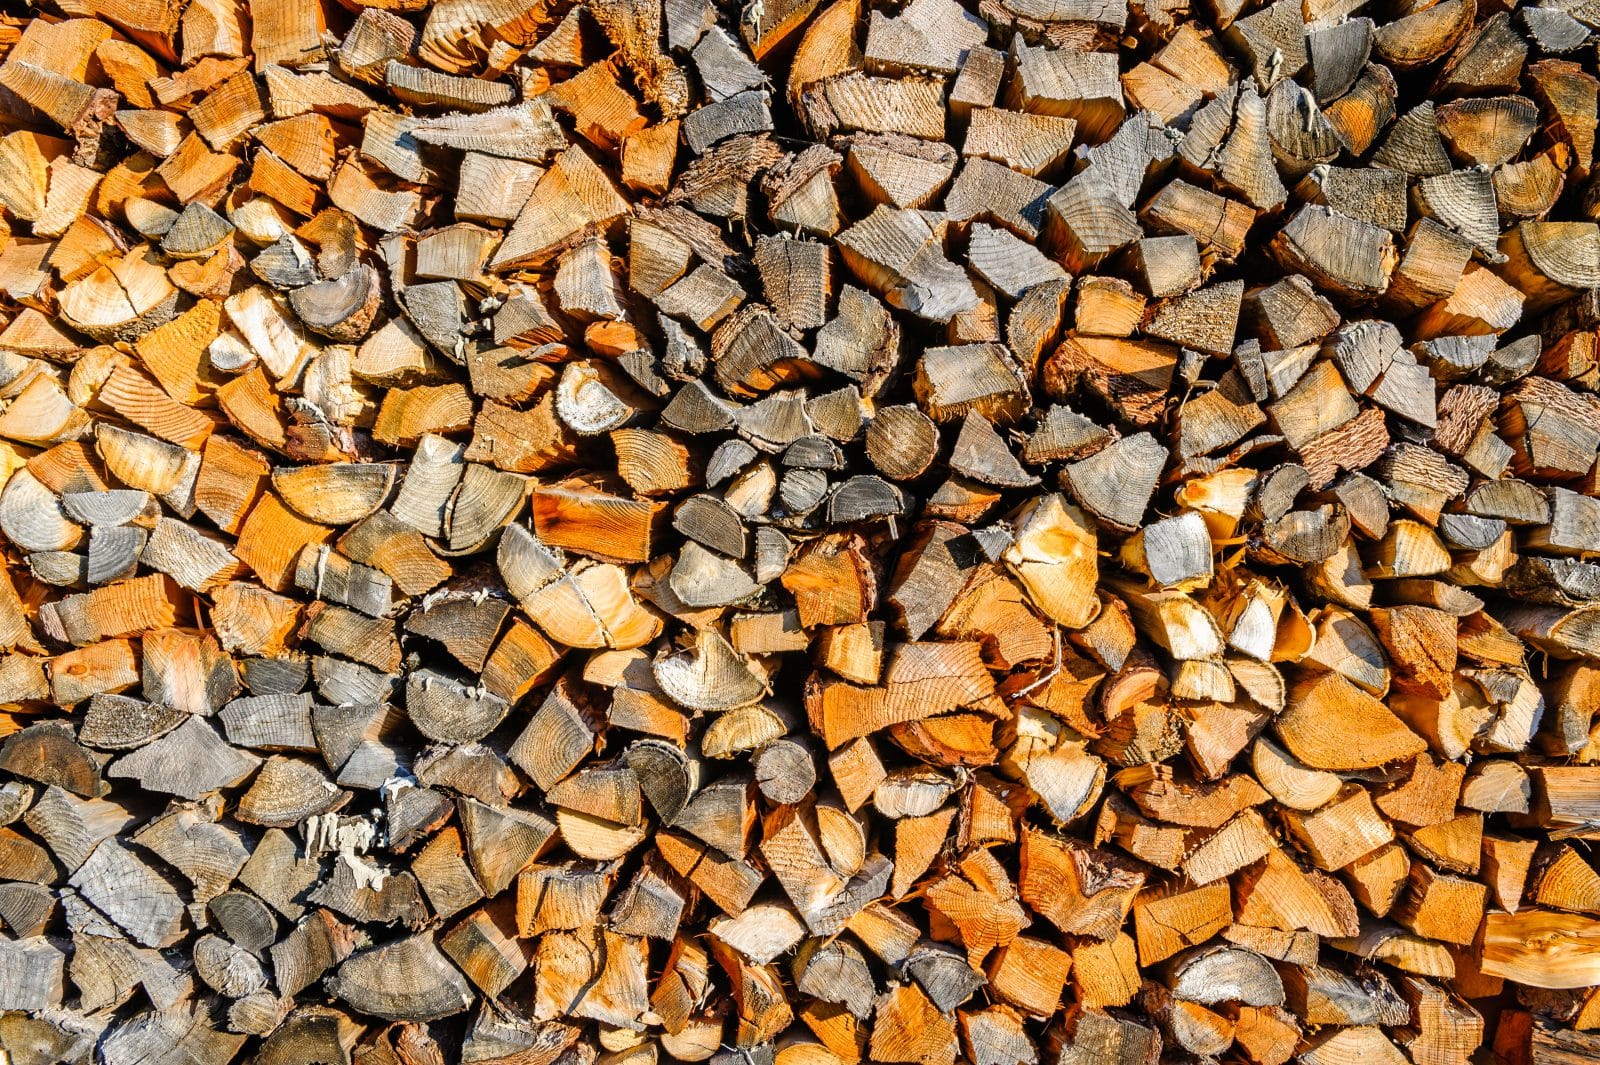 Why Use Biomass for Our Energy Needs